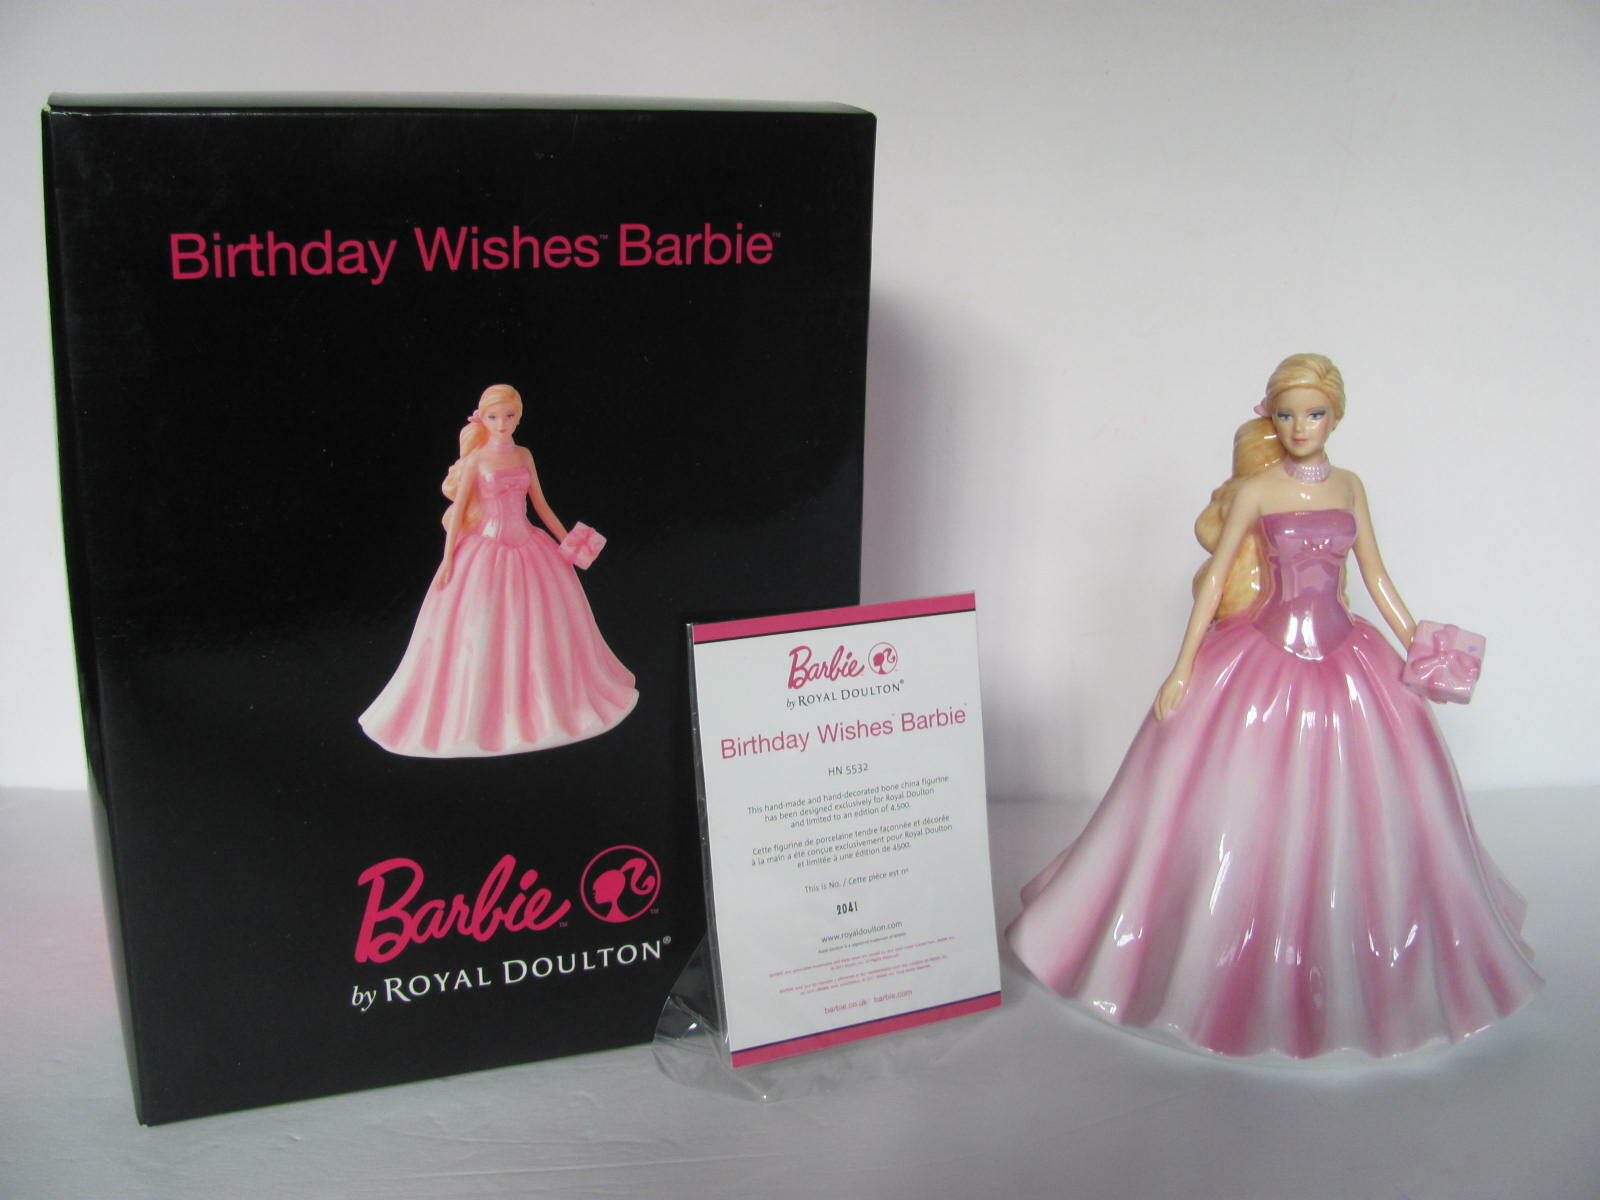 ROYAL DOULTON BARBIE BIRTHDAY WISHES FIGURINE - LIMITED EDITION - MINT IN BOX